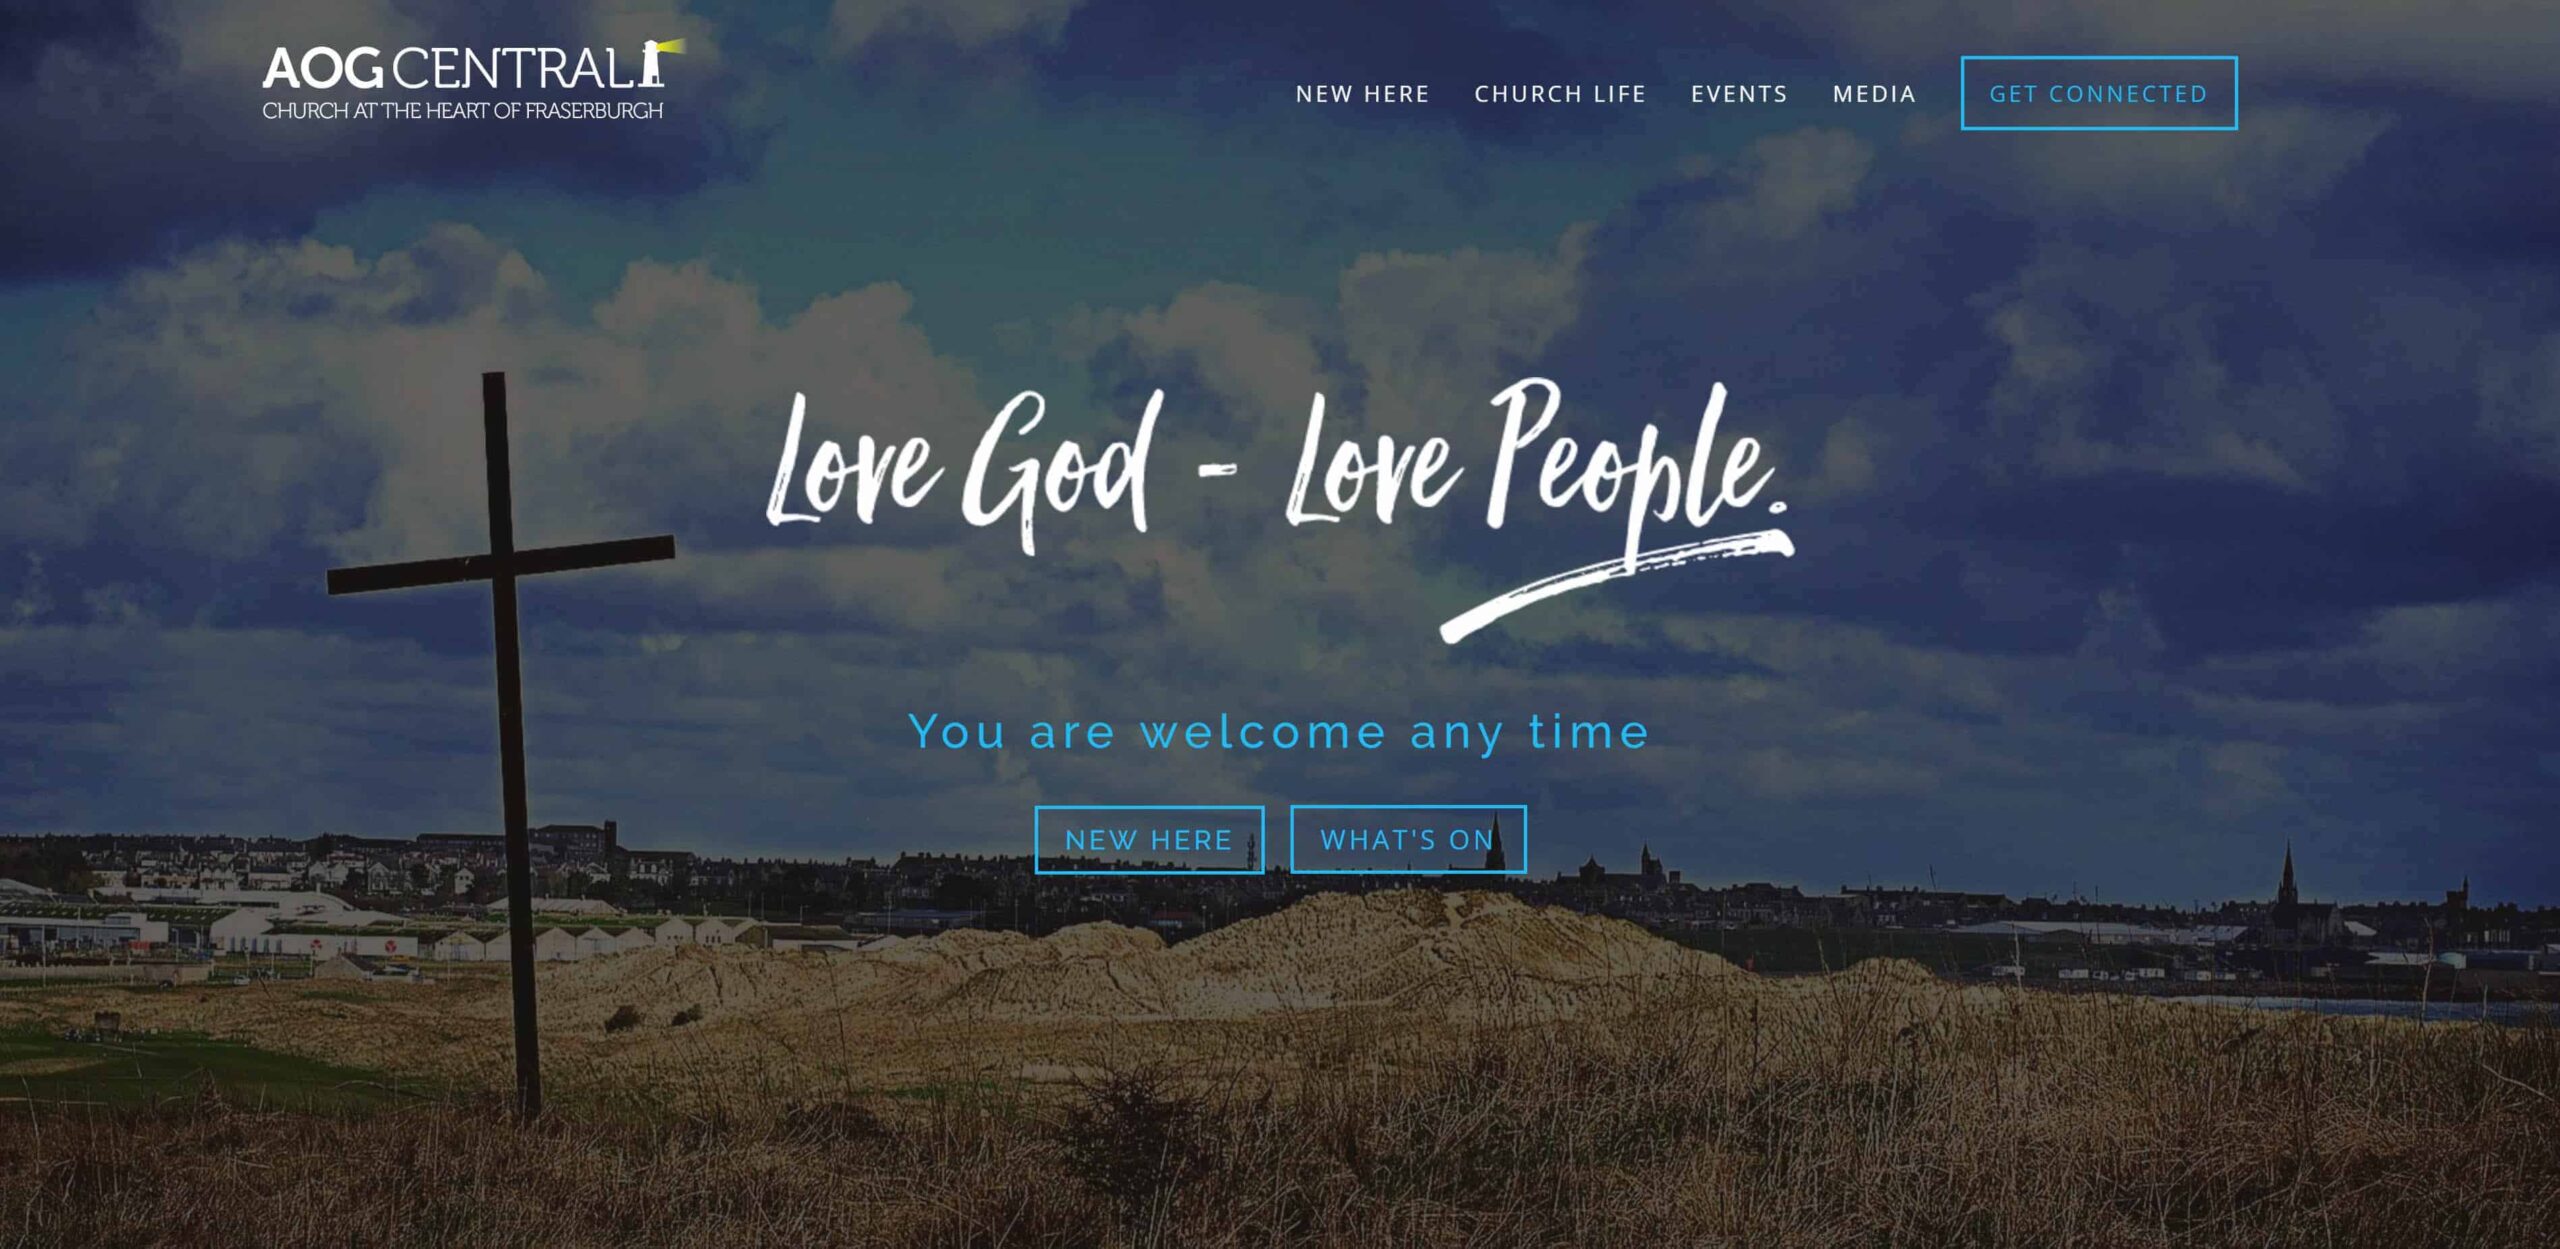 Church Website Homepage - AOG Central